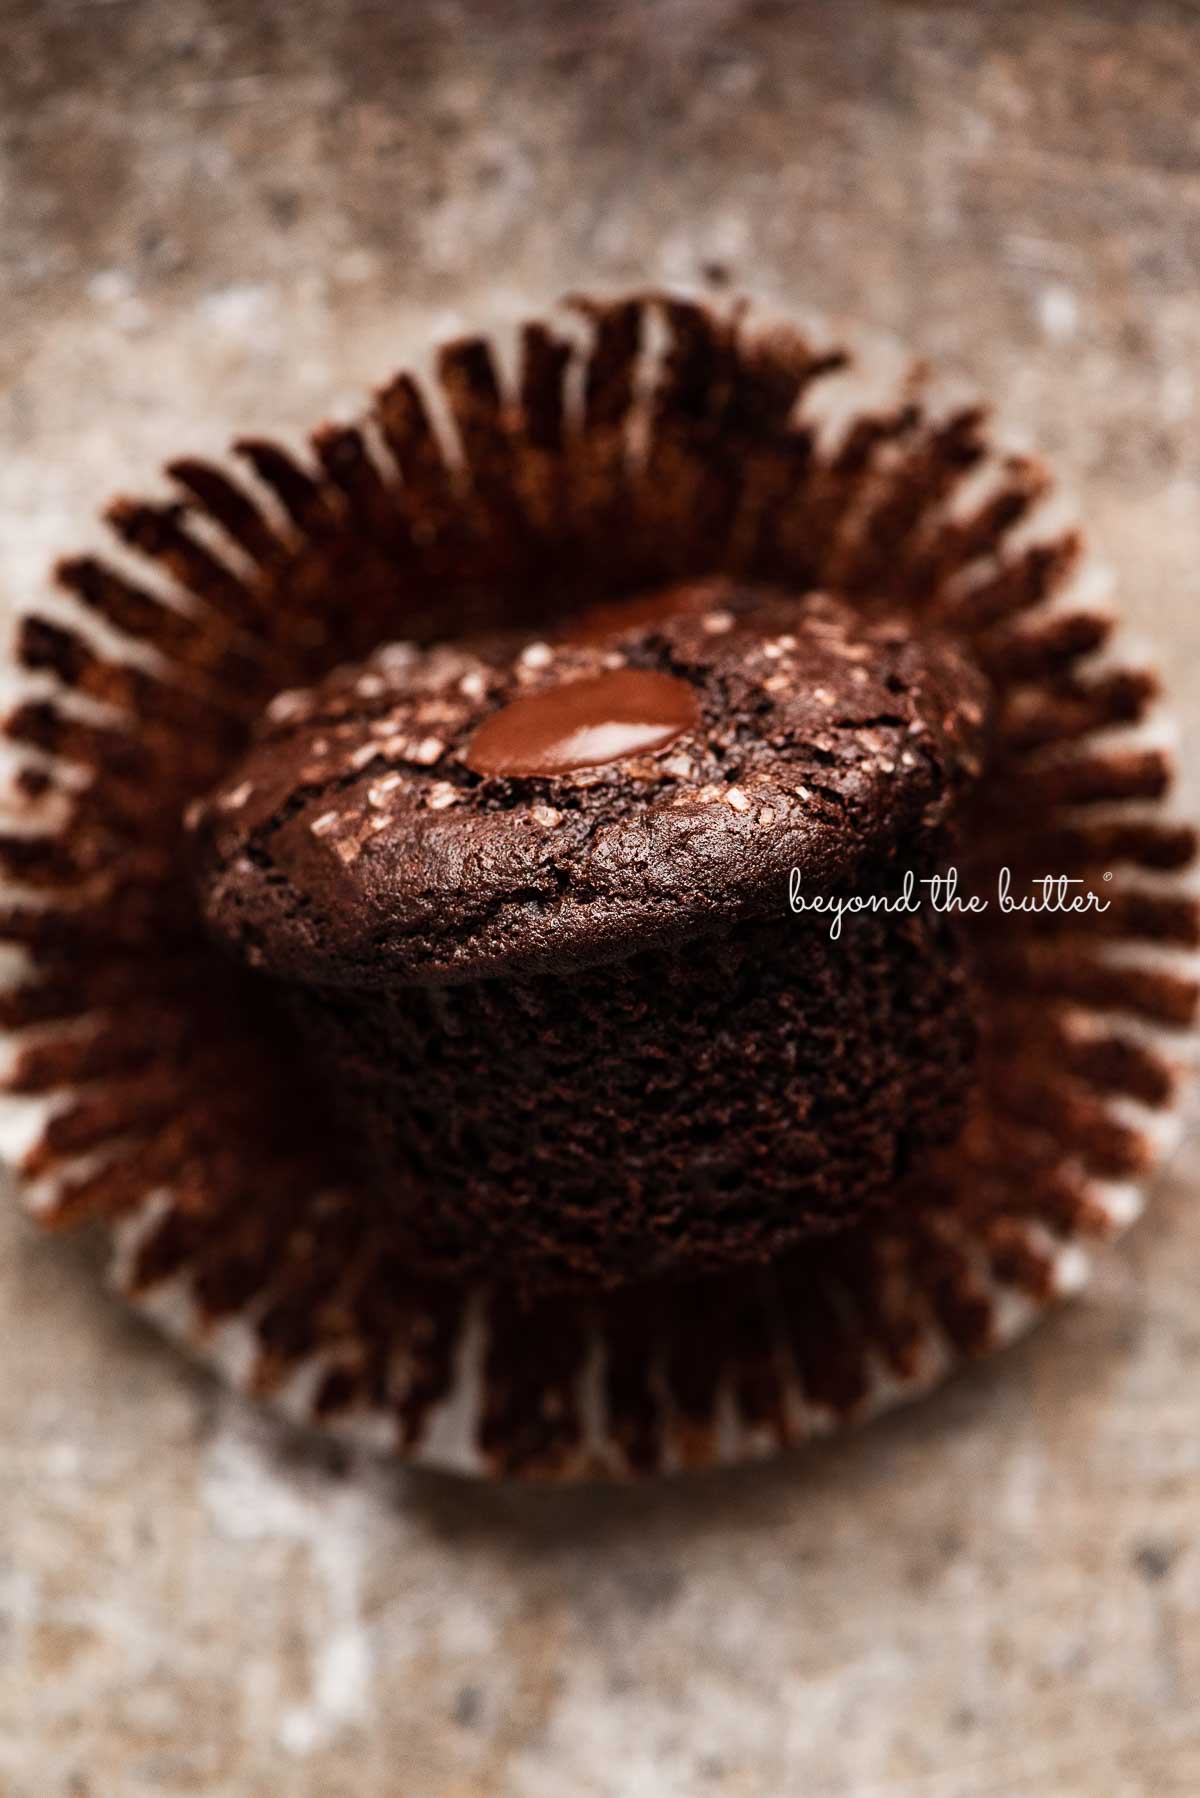 One double chocolate chip muffin without the liner on it's side on light vintage gray background | © Beyond the Butter®